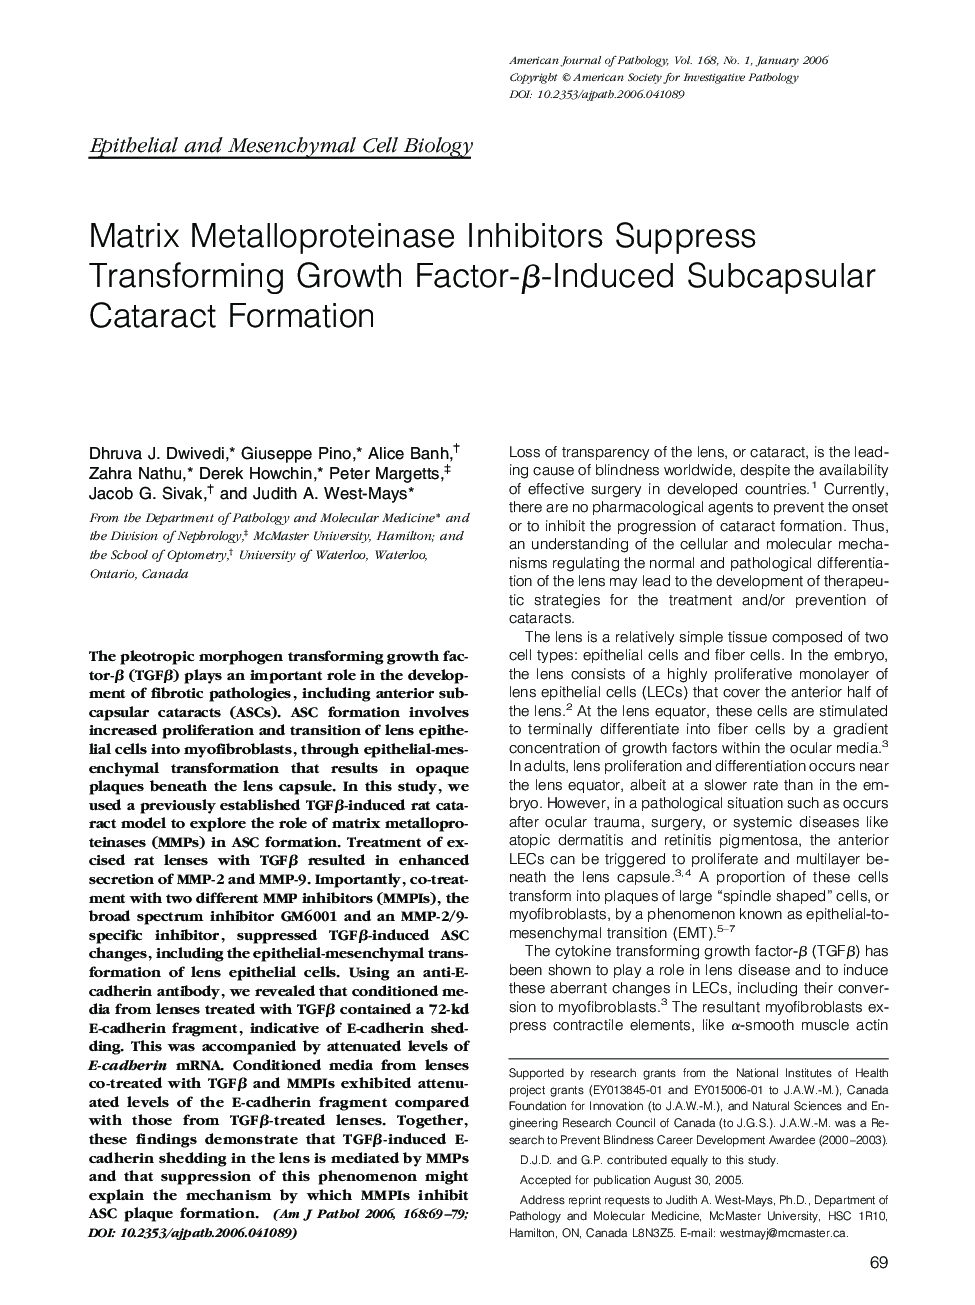 Matrix Metalloproteinase Inhibitors Suppress Transforming Growth Factor-Î²-Induced Subcapsular Cataract Formation